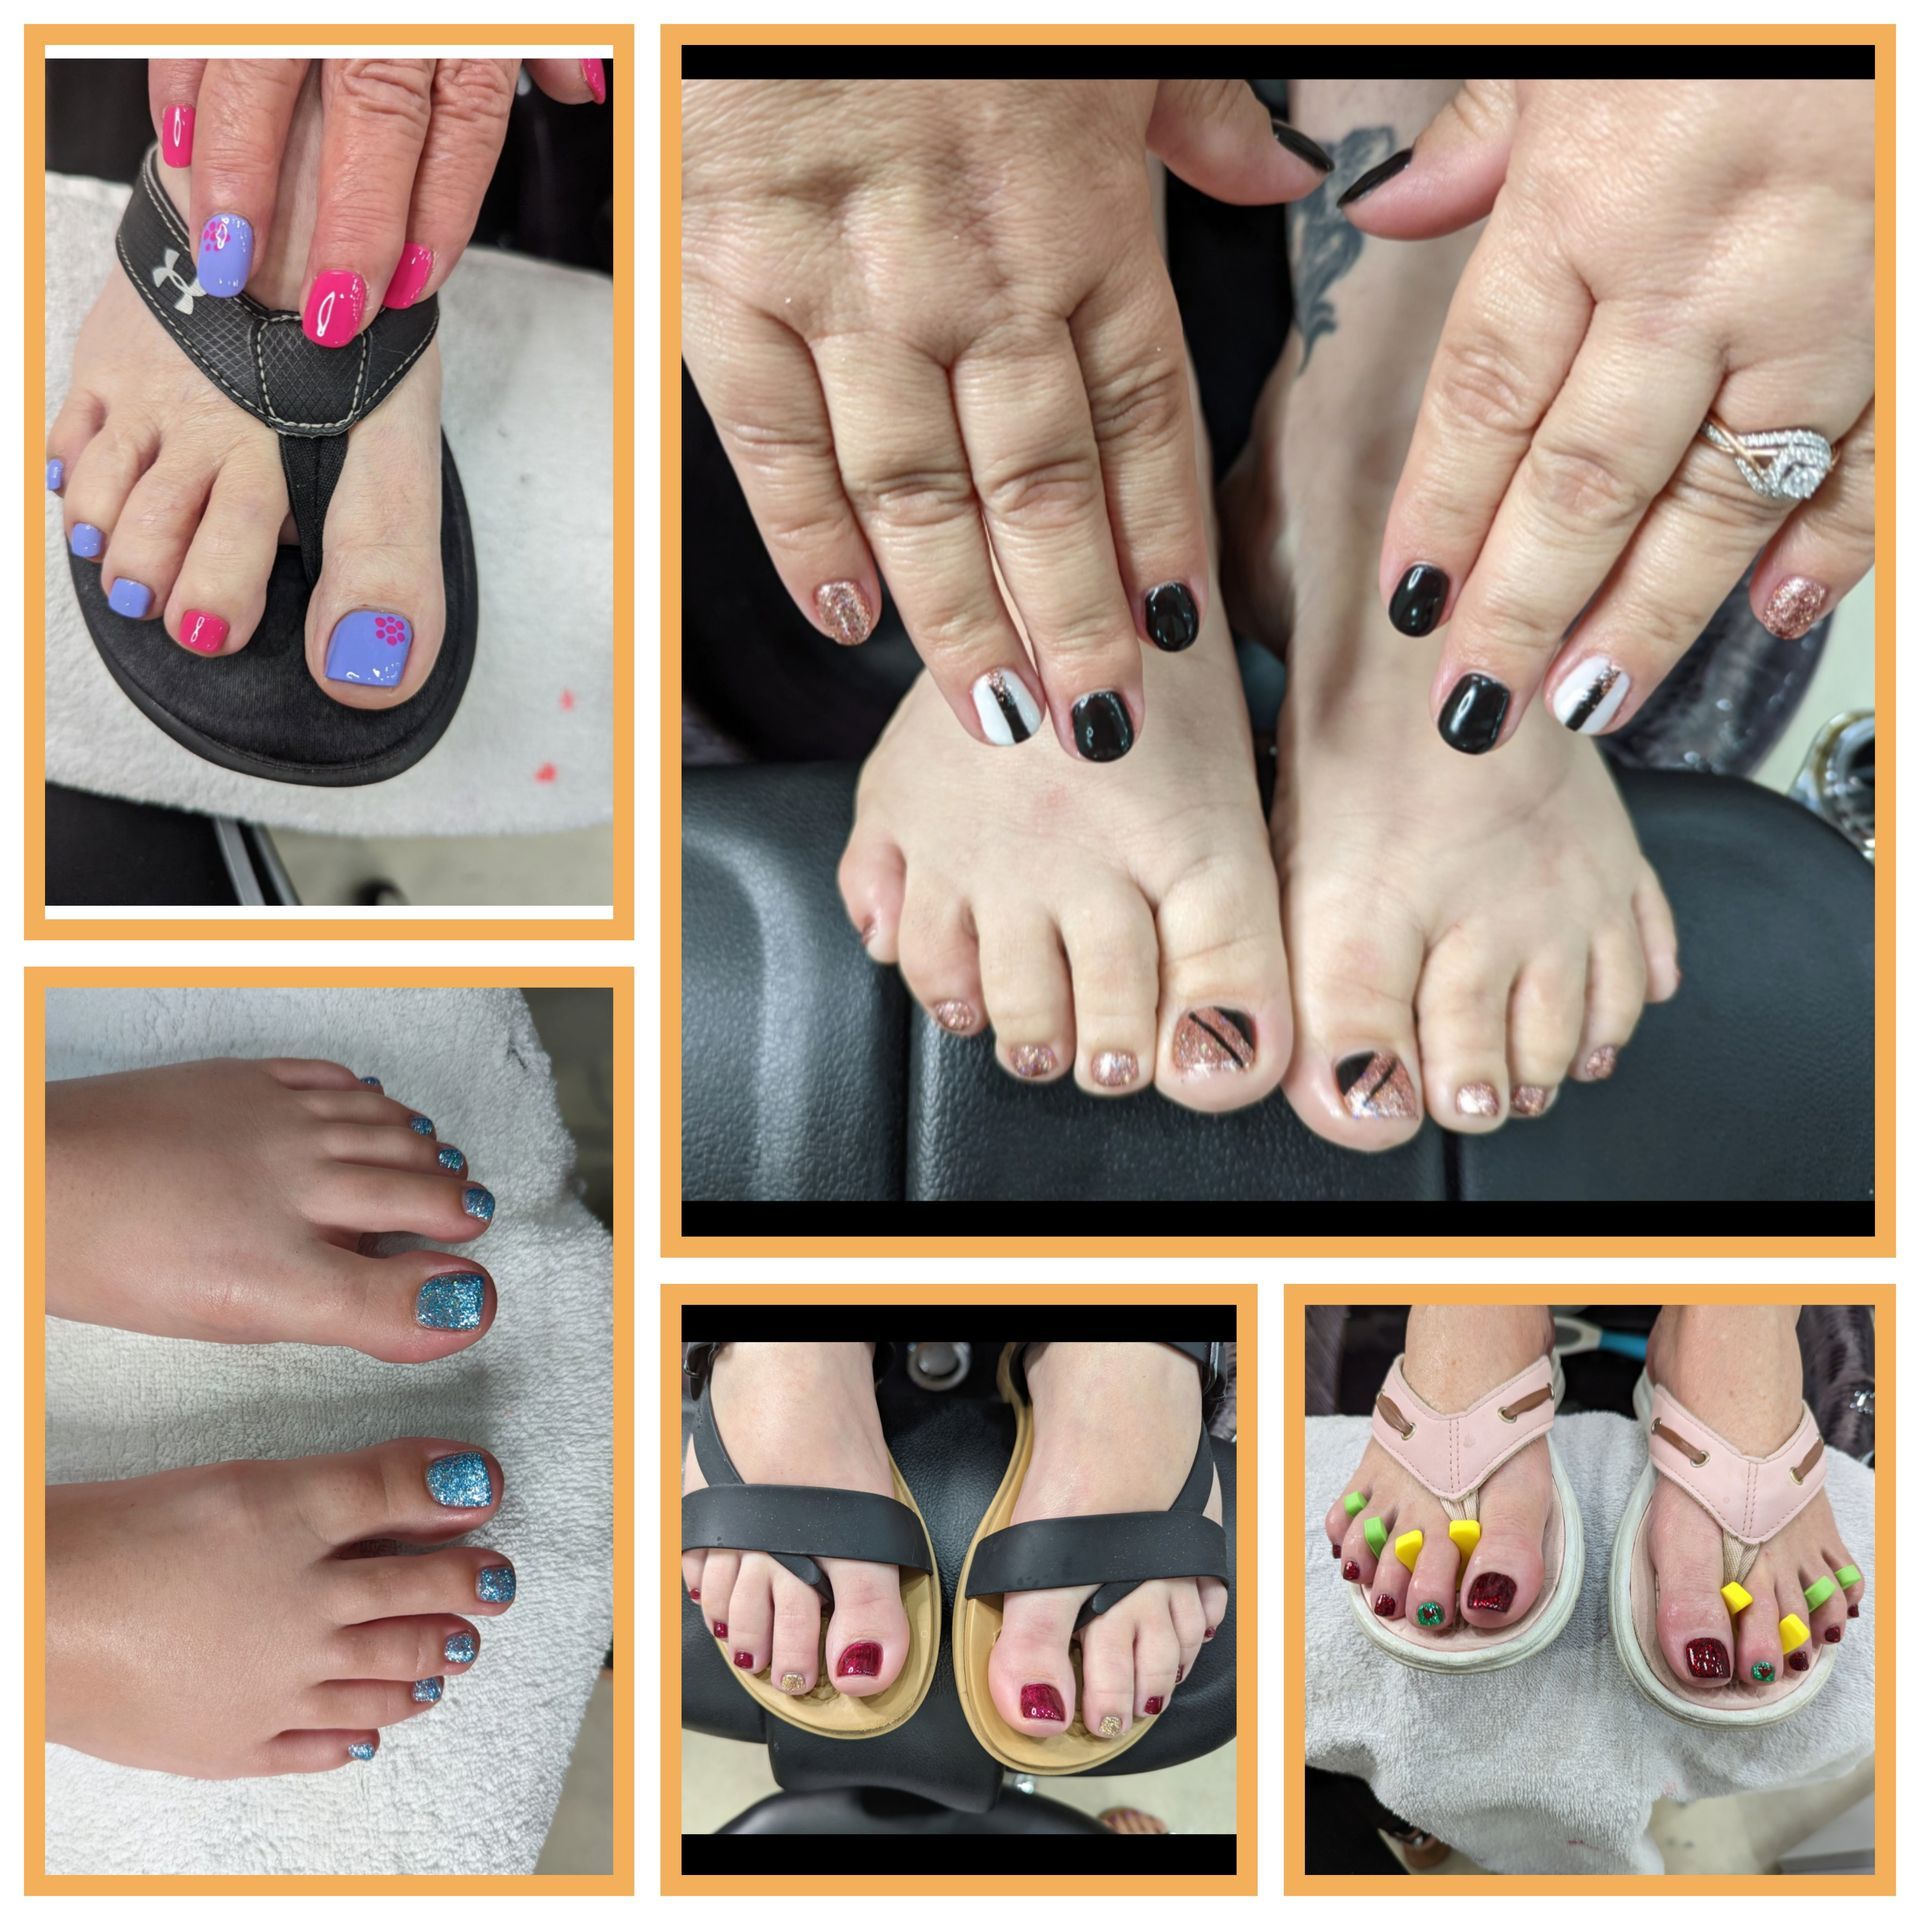 A collage of images of a woman 's feet and nails